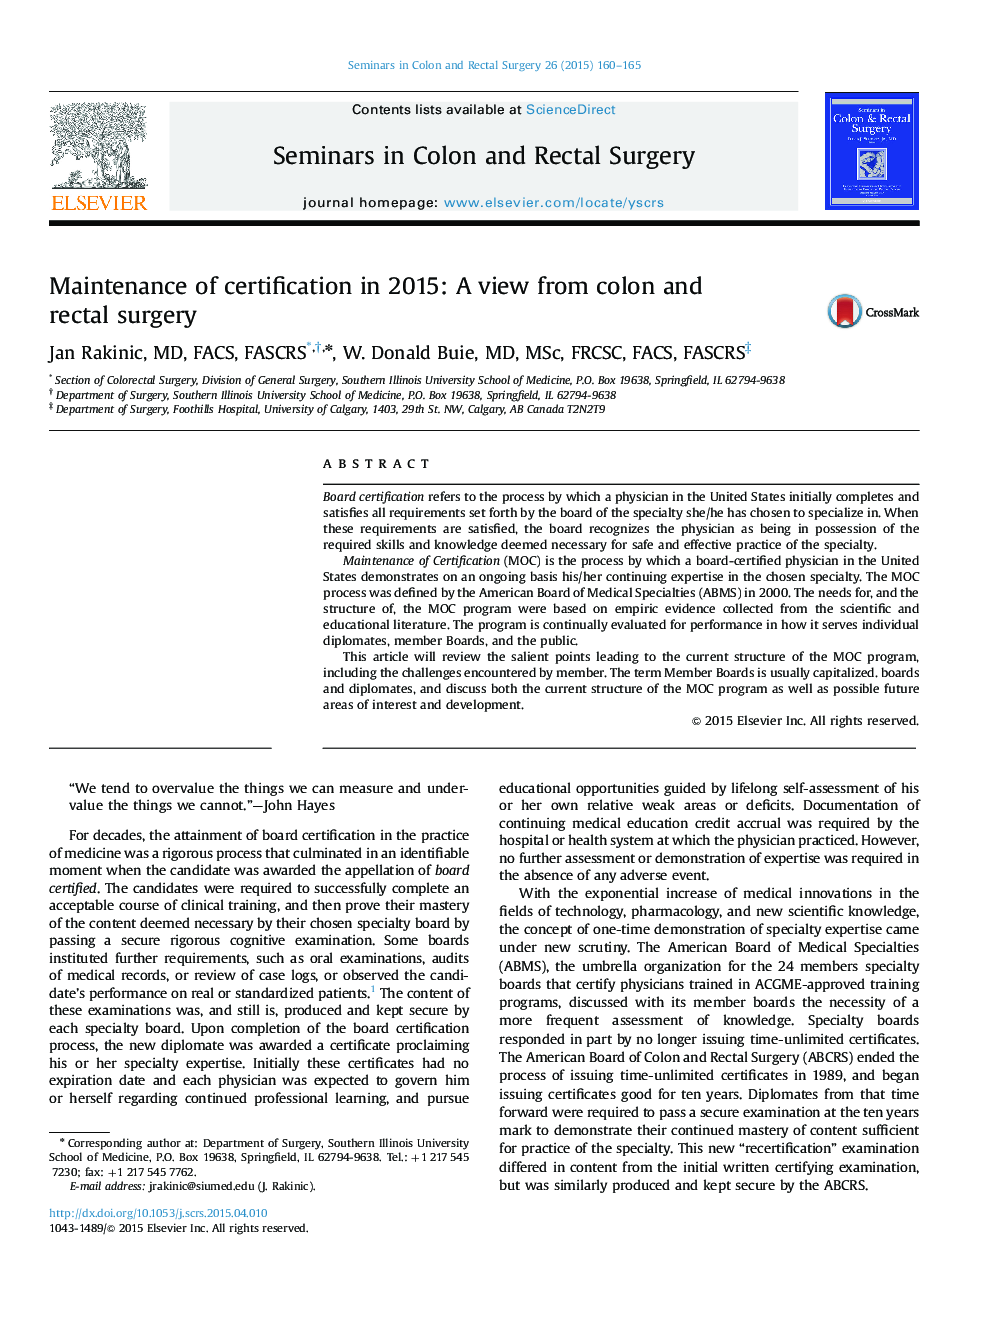 Maintenance of certification in 2015: A view from colon and rectal surgery